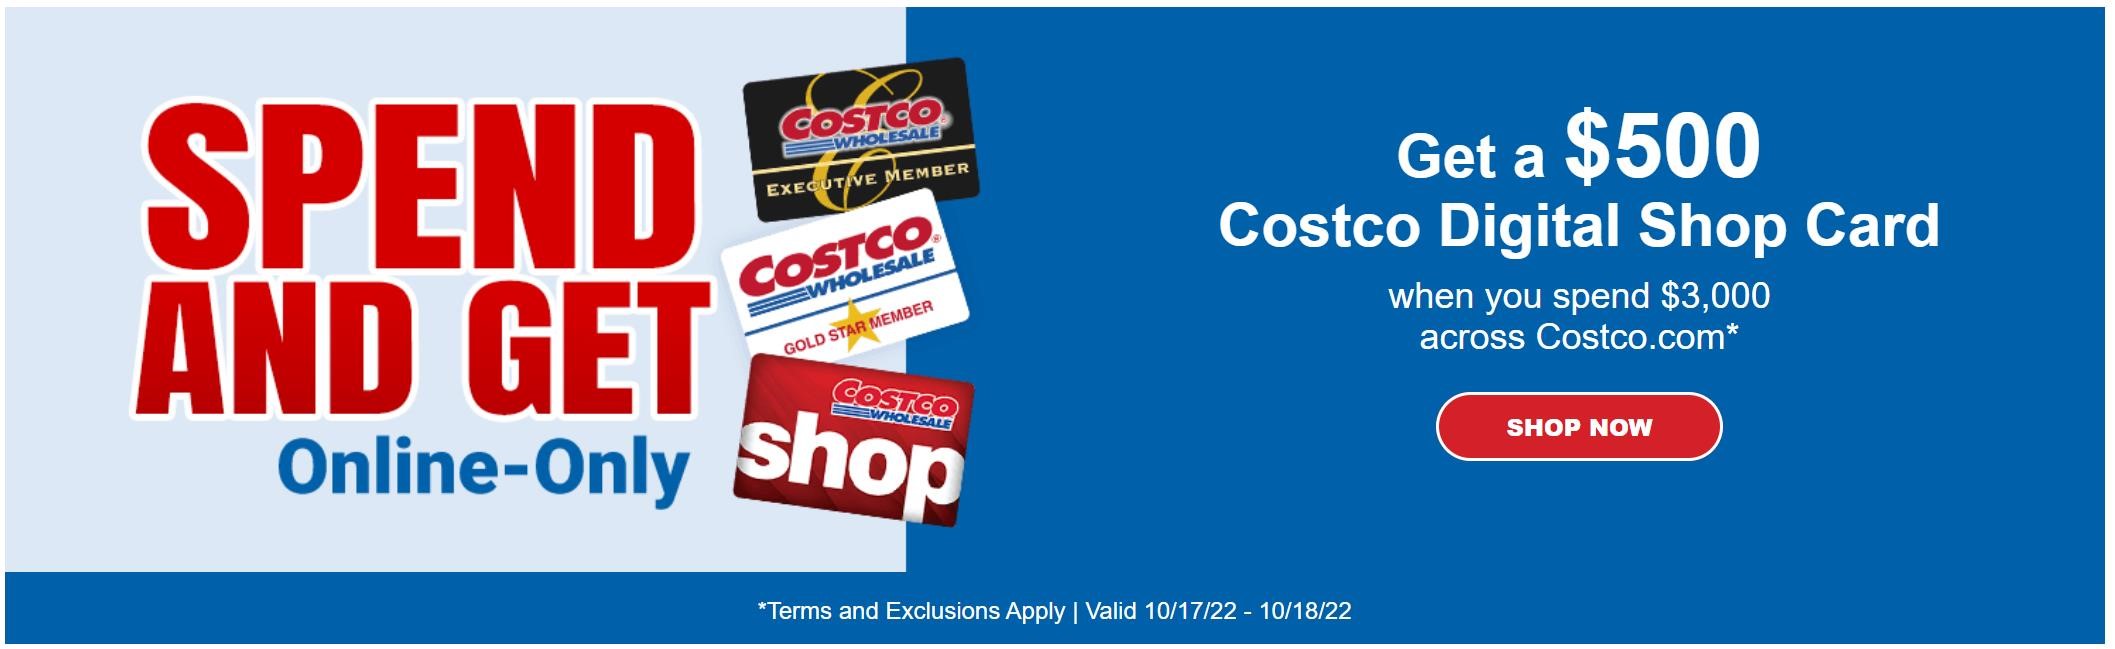 a group of costco cards